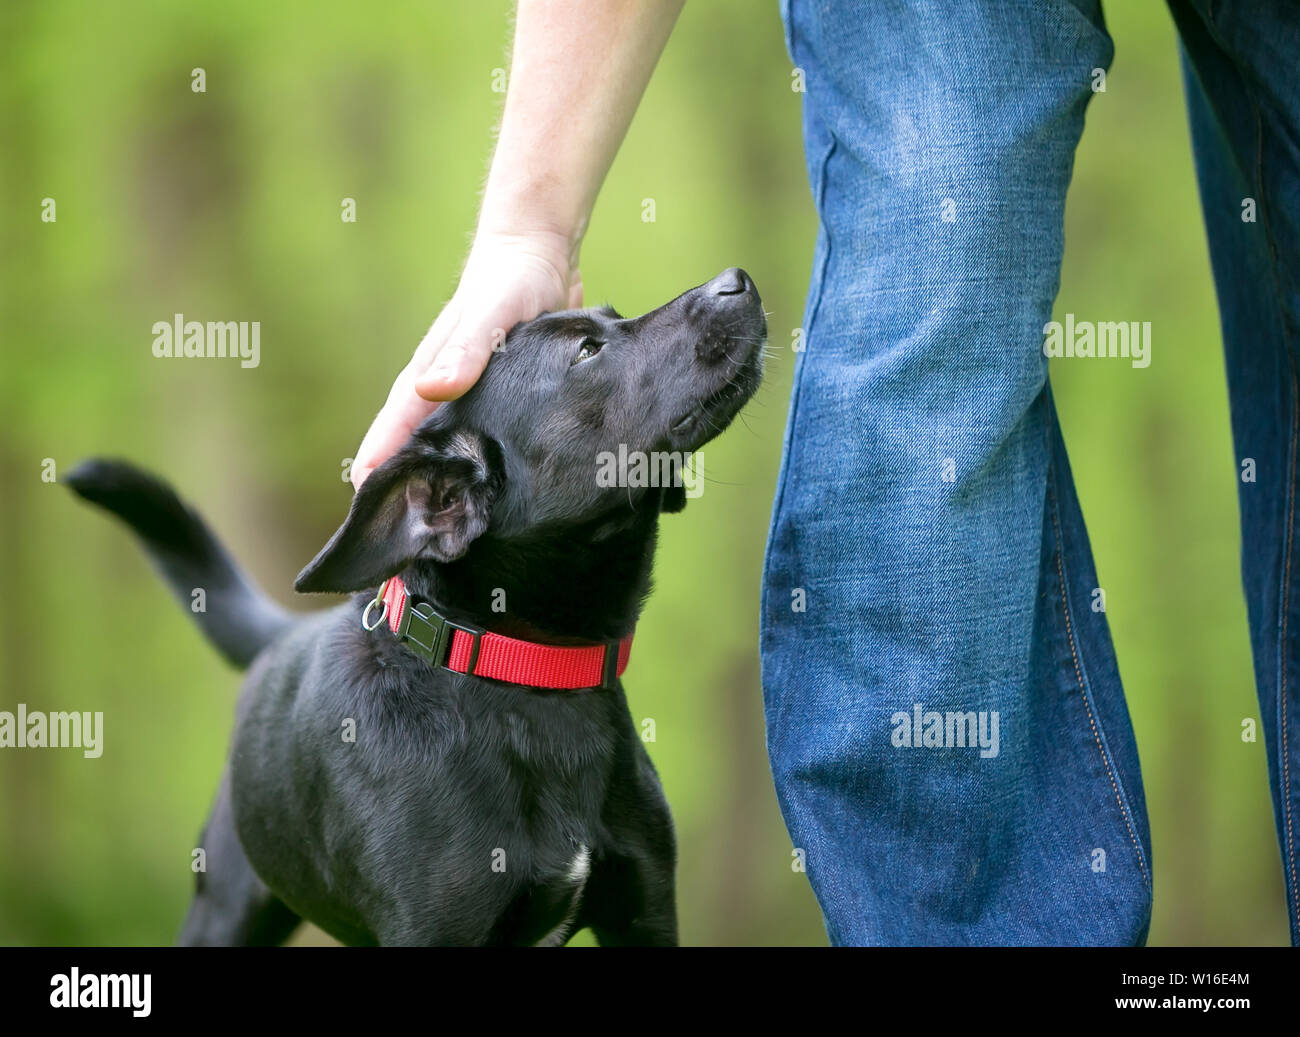 A person petting a small black Terrier mixed breed dog outdoors Stock Photo